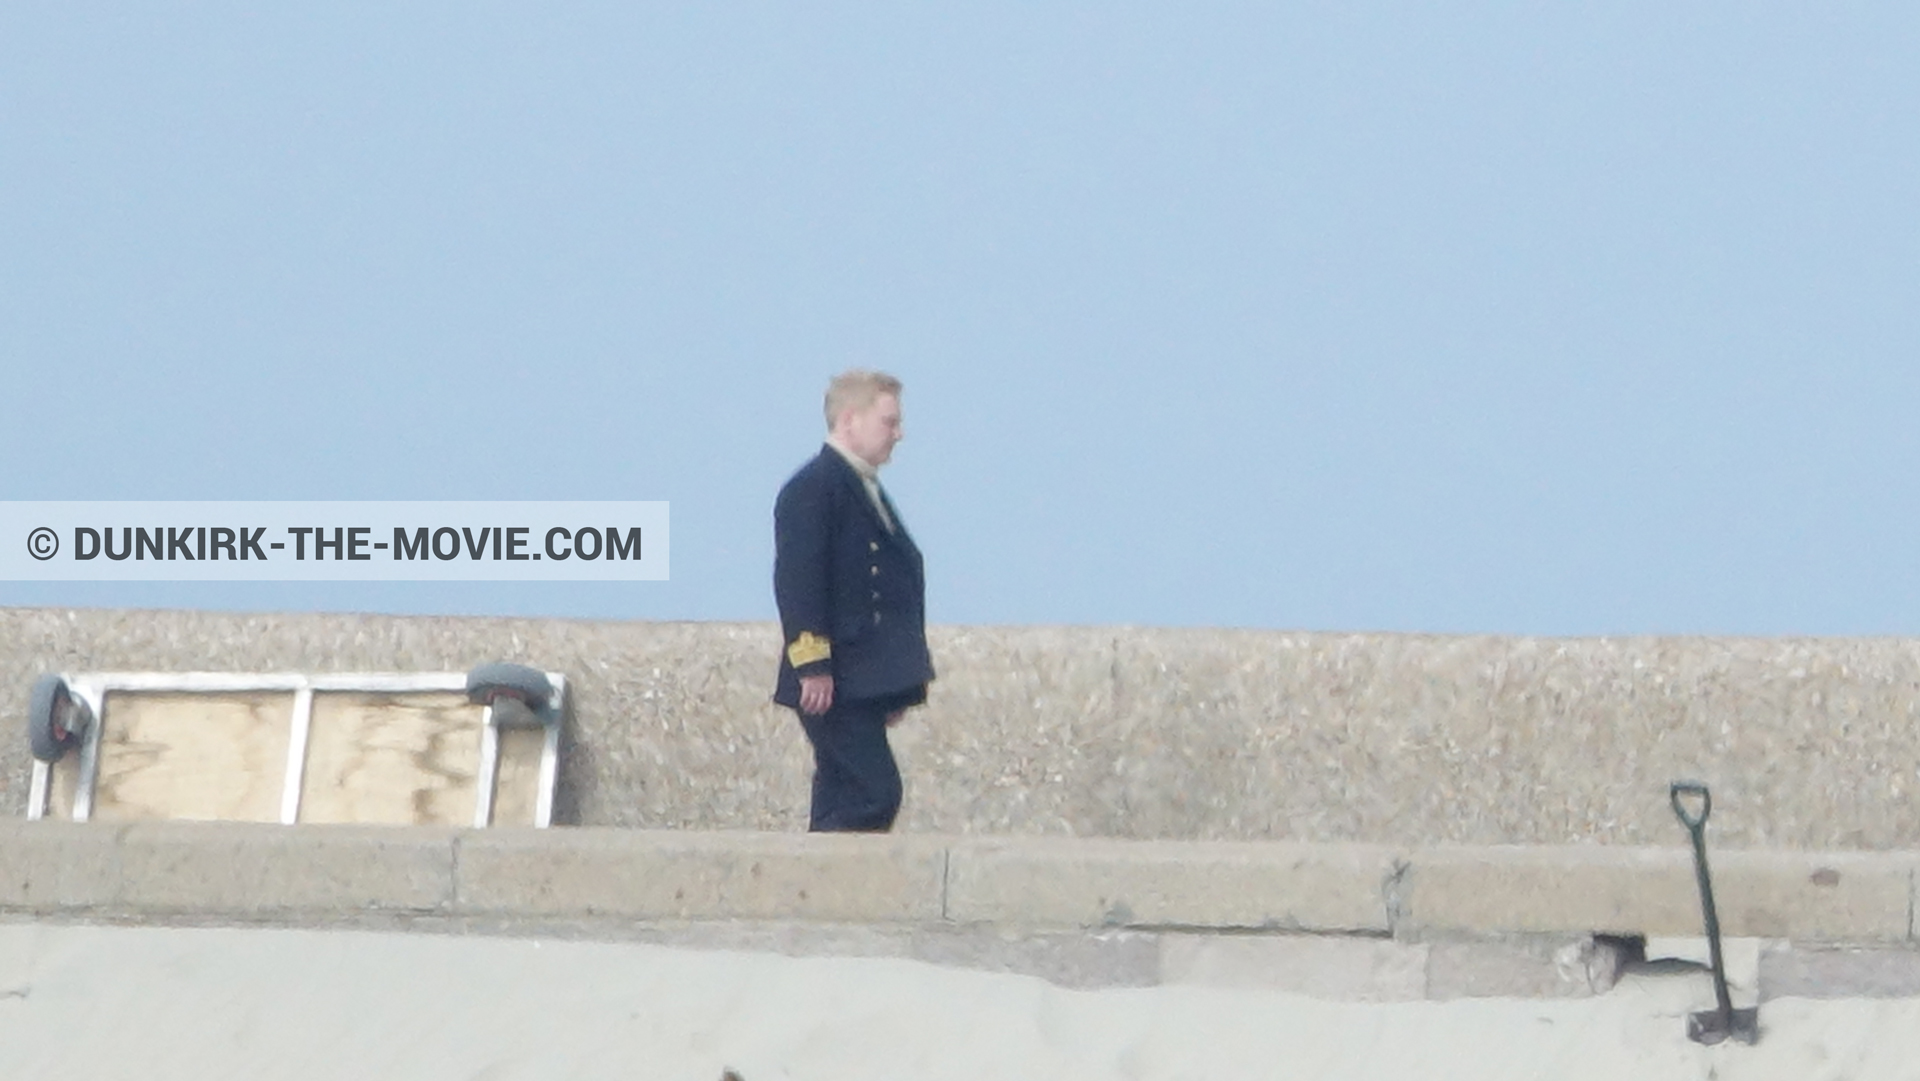 Picture with EST pier, Kenneth Branagh,  from behind the scene of the Dunkirk movie by Nolan